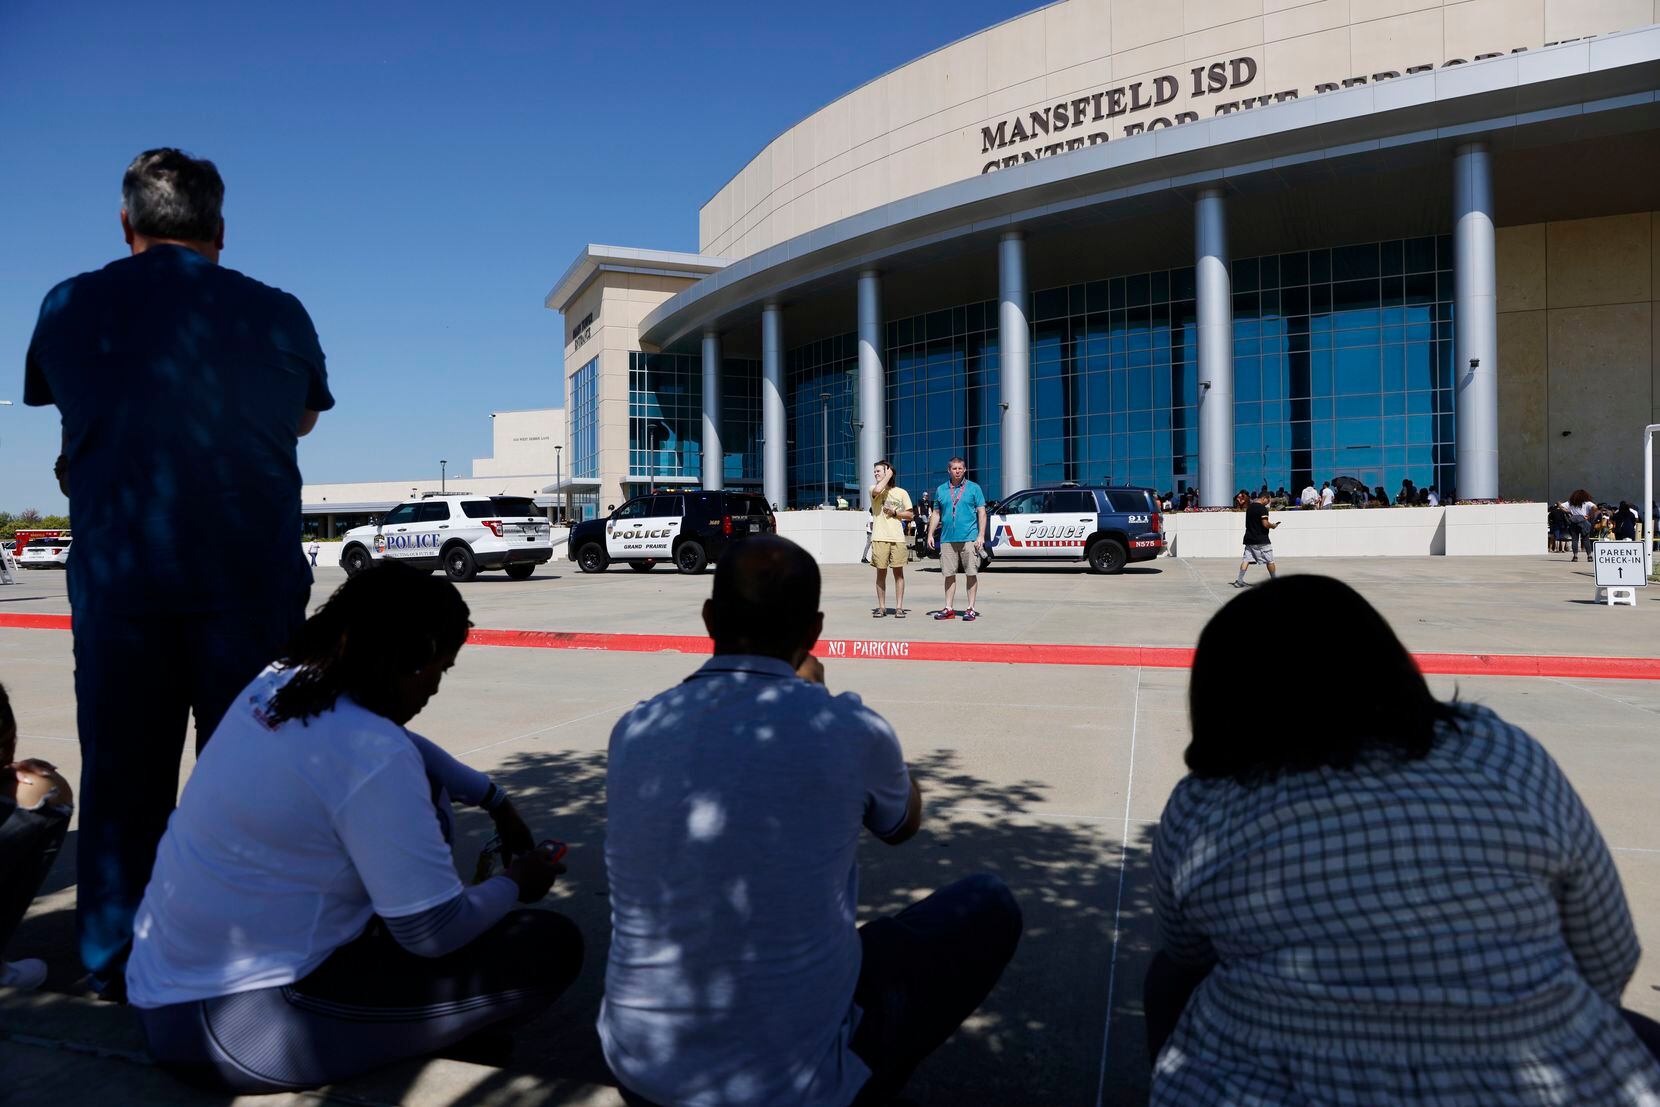 Parents of Timberview High School students wait outside of the Mansfield ISD Center for The Performing Arts on Wednesday, October 6, 2021 in Mansfield, TX.Four people were injured in a shooting at Timberview High School in Arlington on Wednesday morning, and authorities said the suspect remained at large.  (Elias Valverde II/The Dallas Morning News)